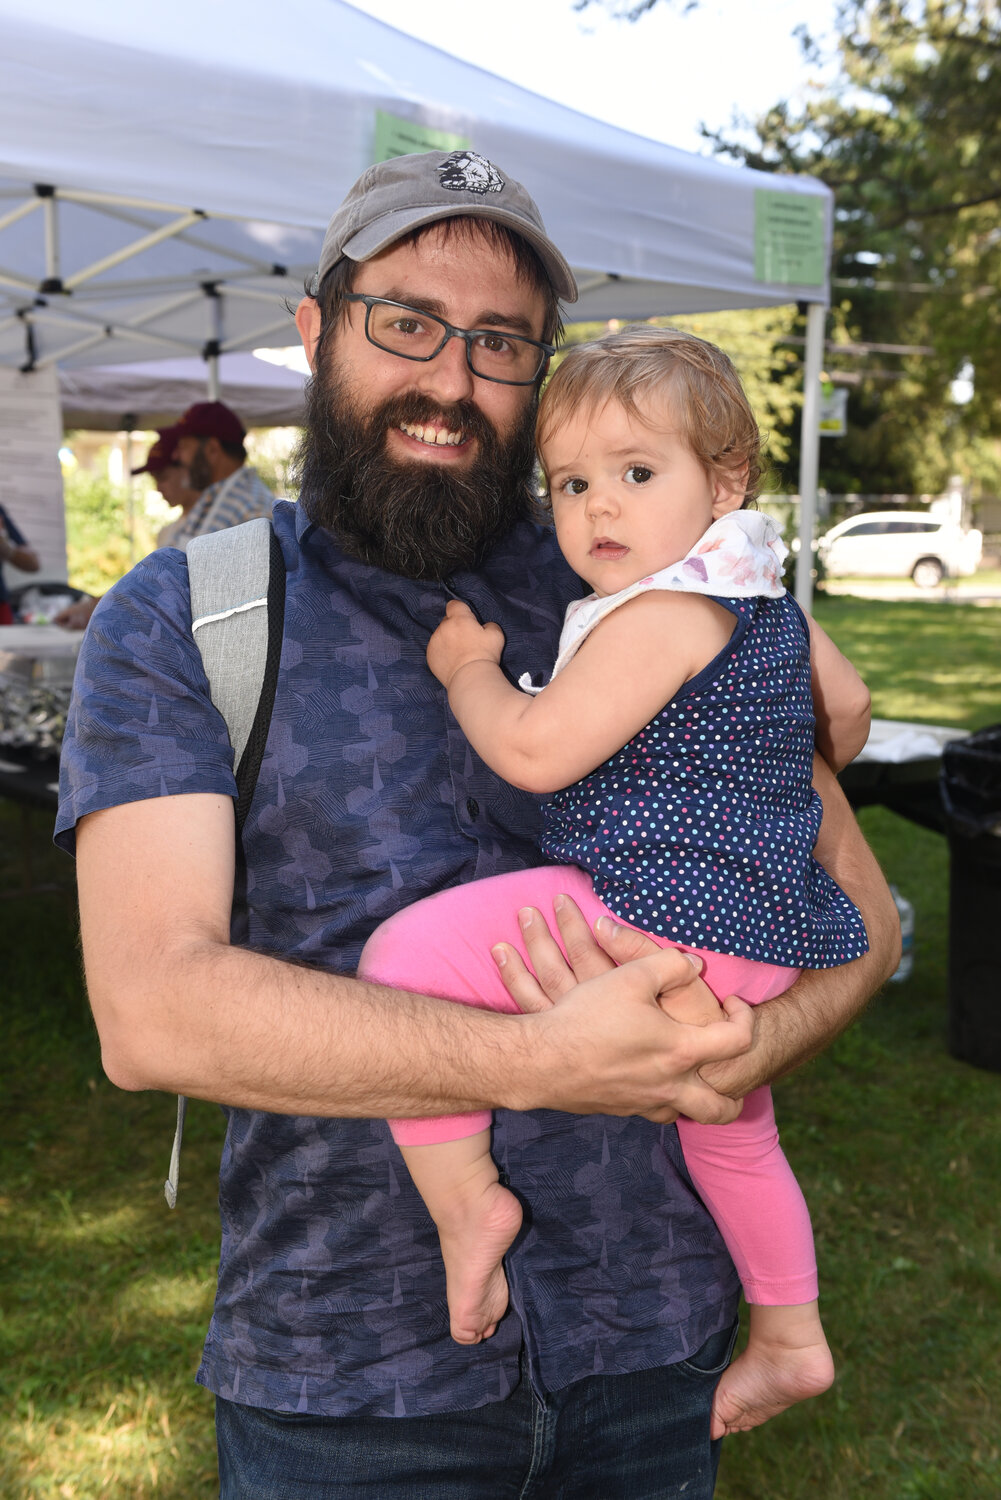 Andrew and Elizabeth Prather enjoyed the end of summer at the festival.